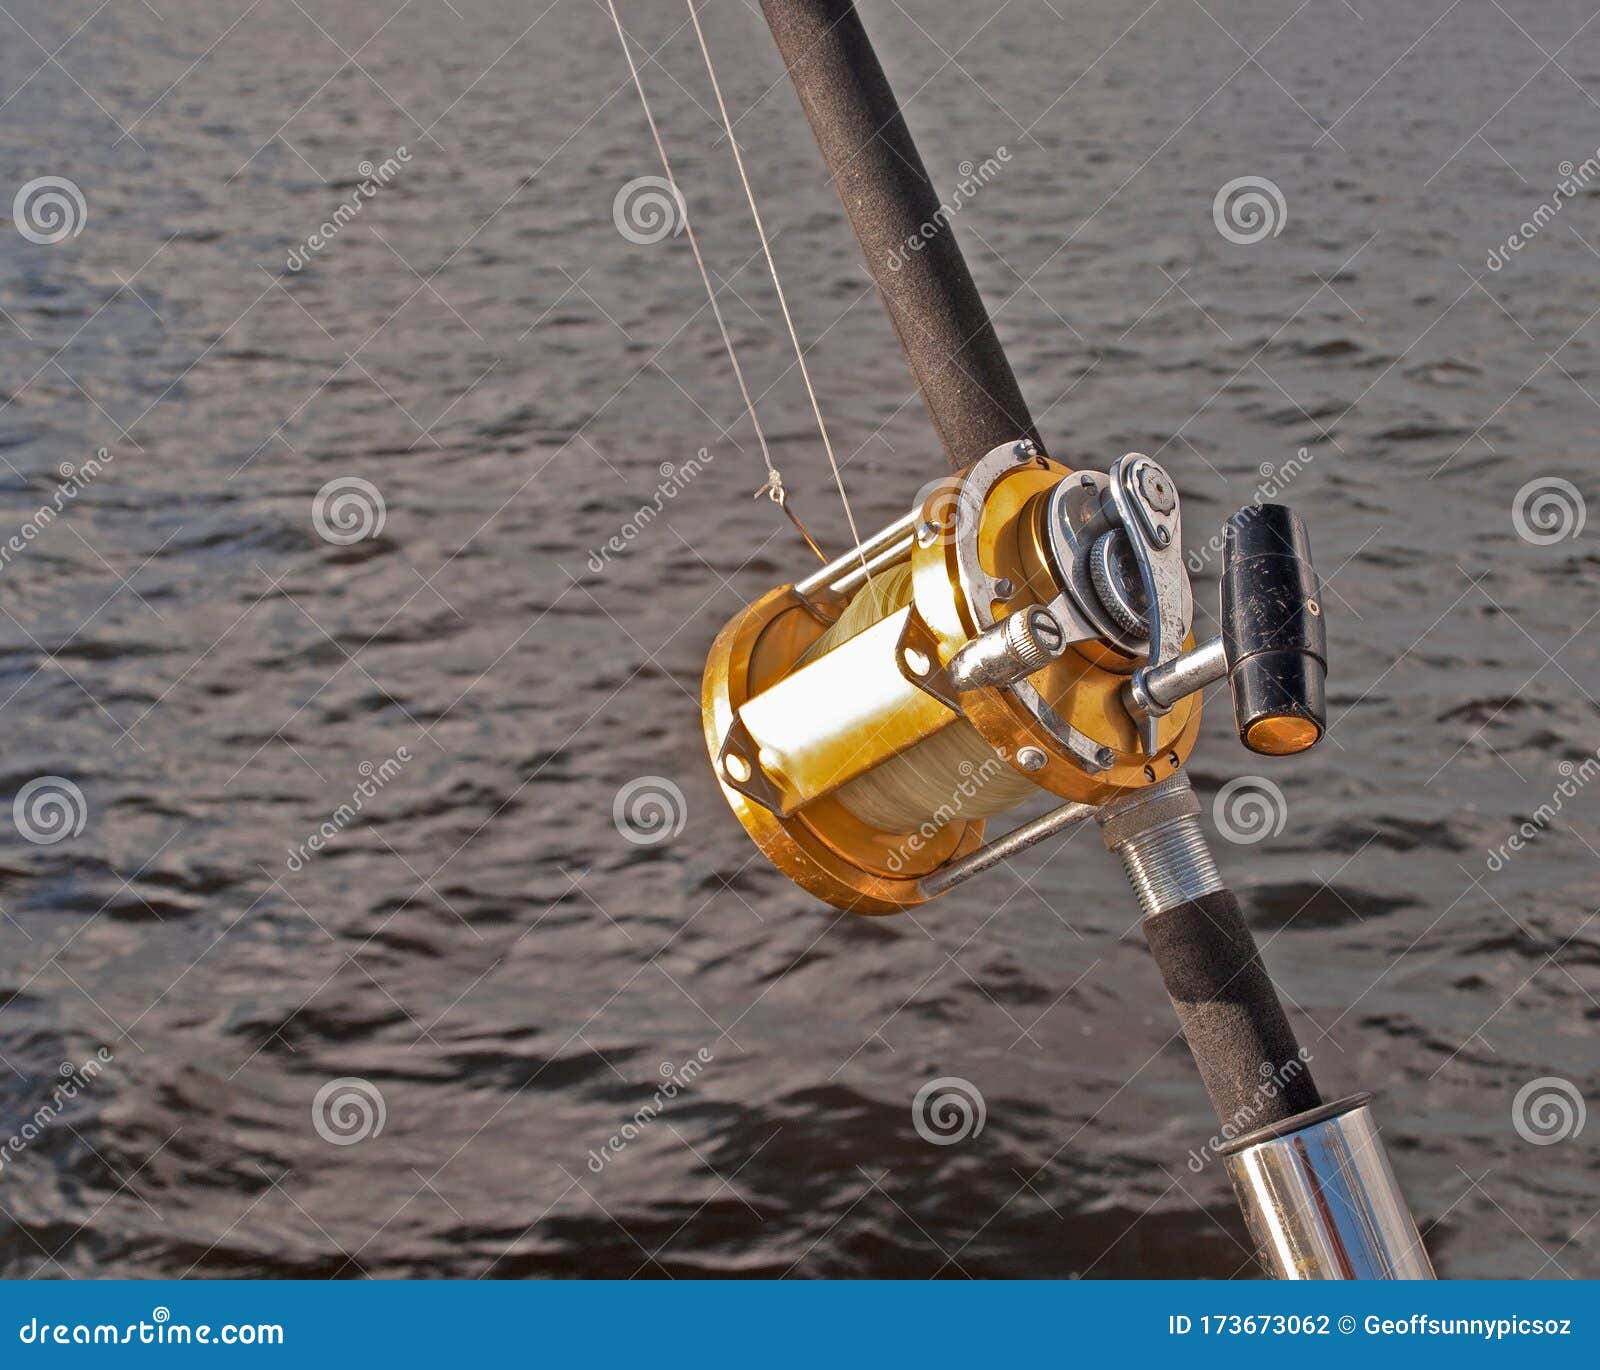 https://thumbs.dreamstime.com/z/gold-coloured-big-game-wide-fishing-reel-closeup-used-condition-located-rod-holder-aboard-yacht-ready-to-deploy-173673062.jpg